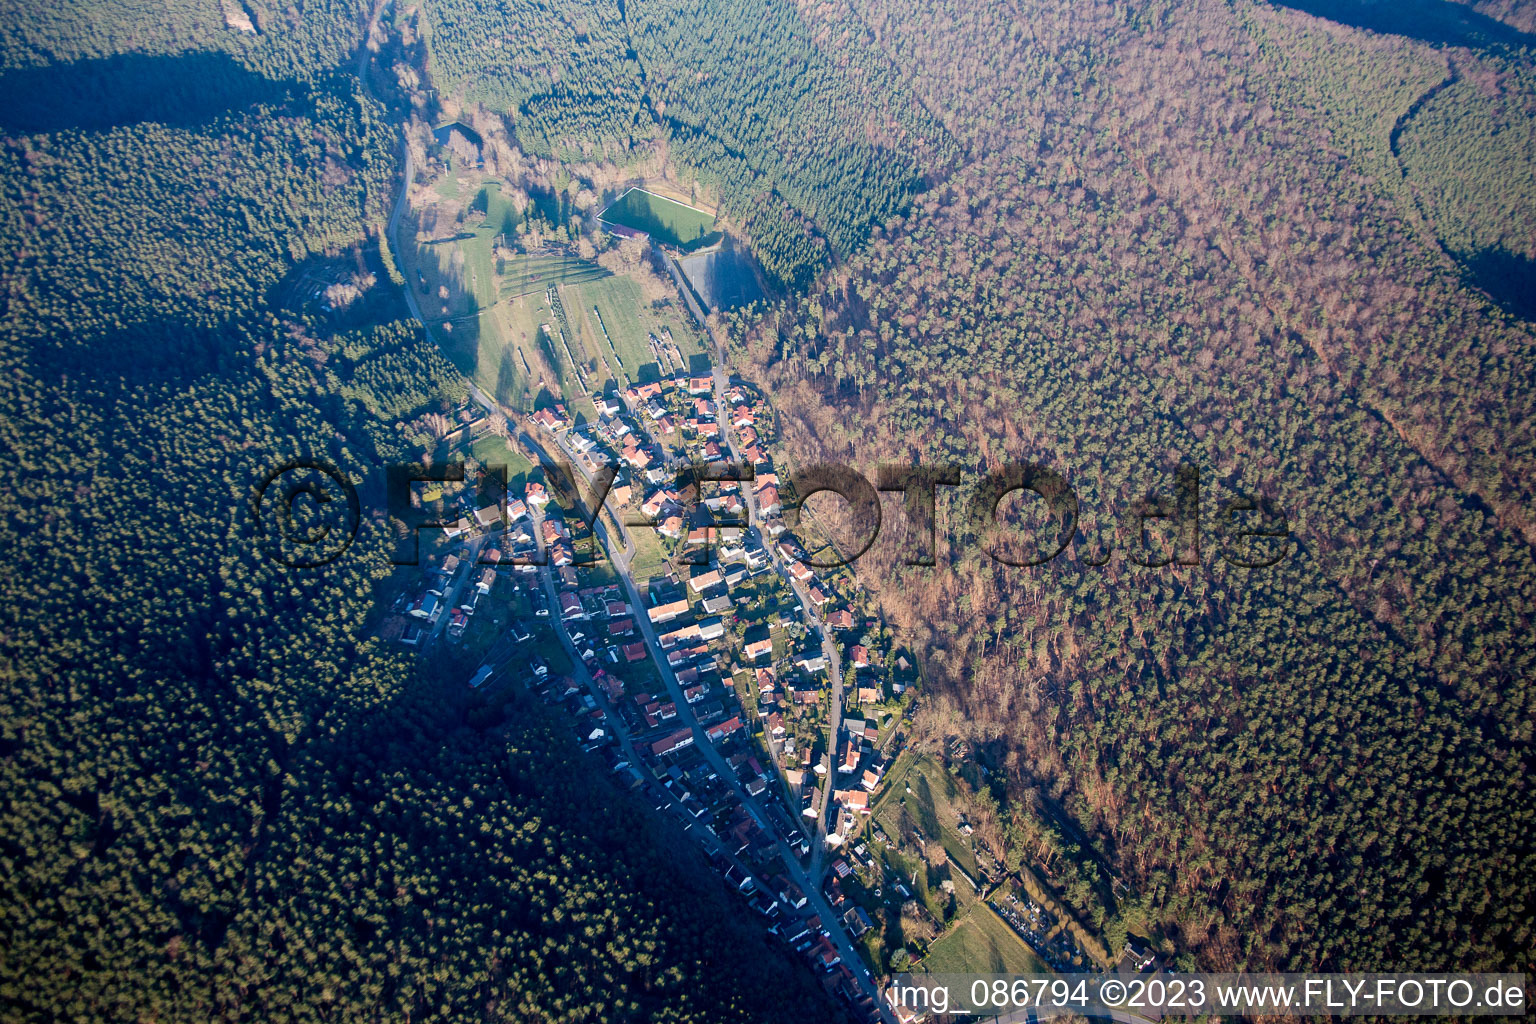 Aerial view of Spirkelbach in the state Rhineland-Palatinate, Germany